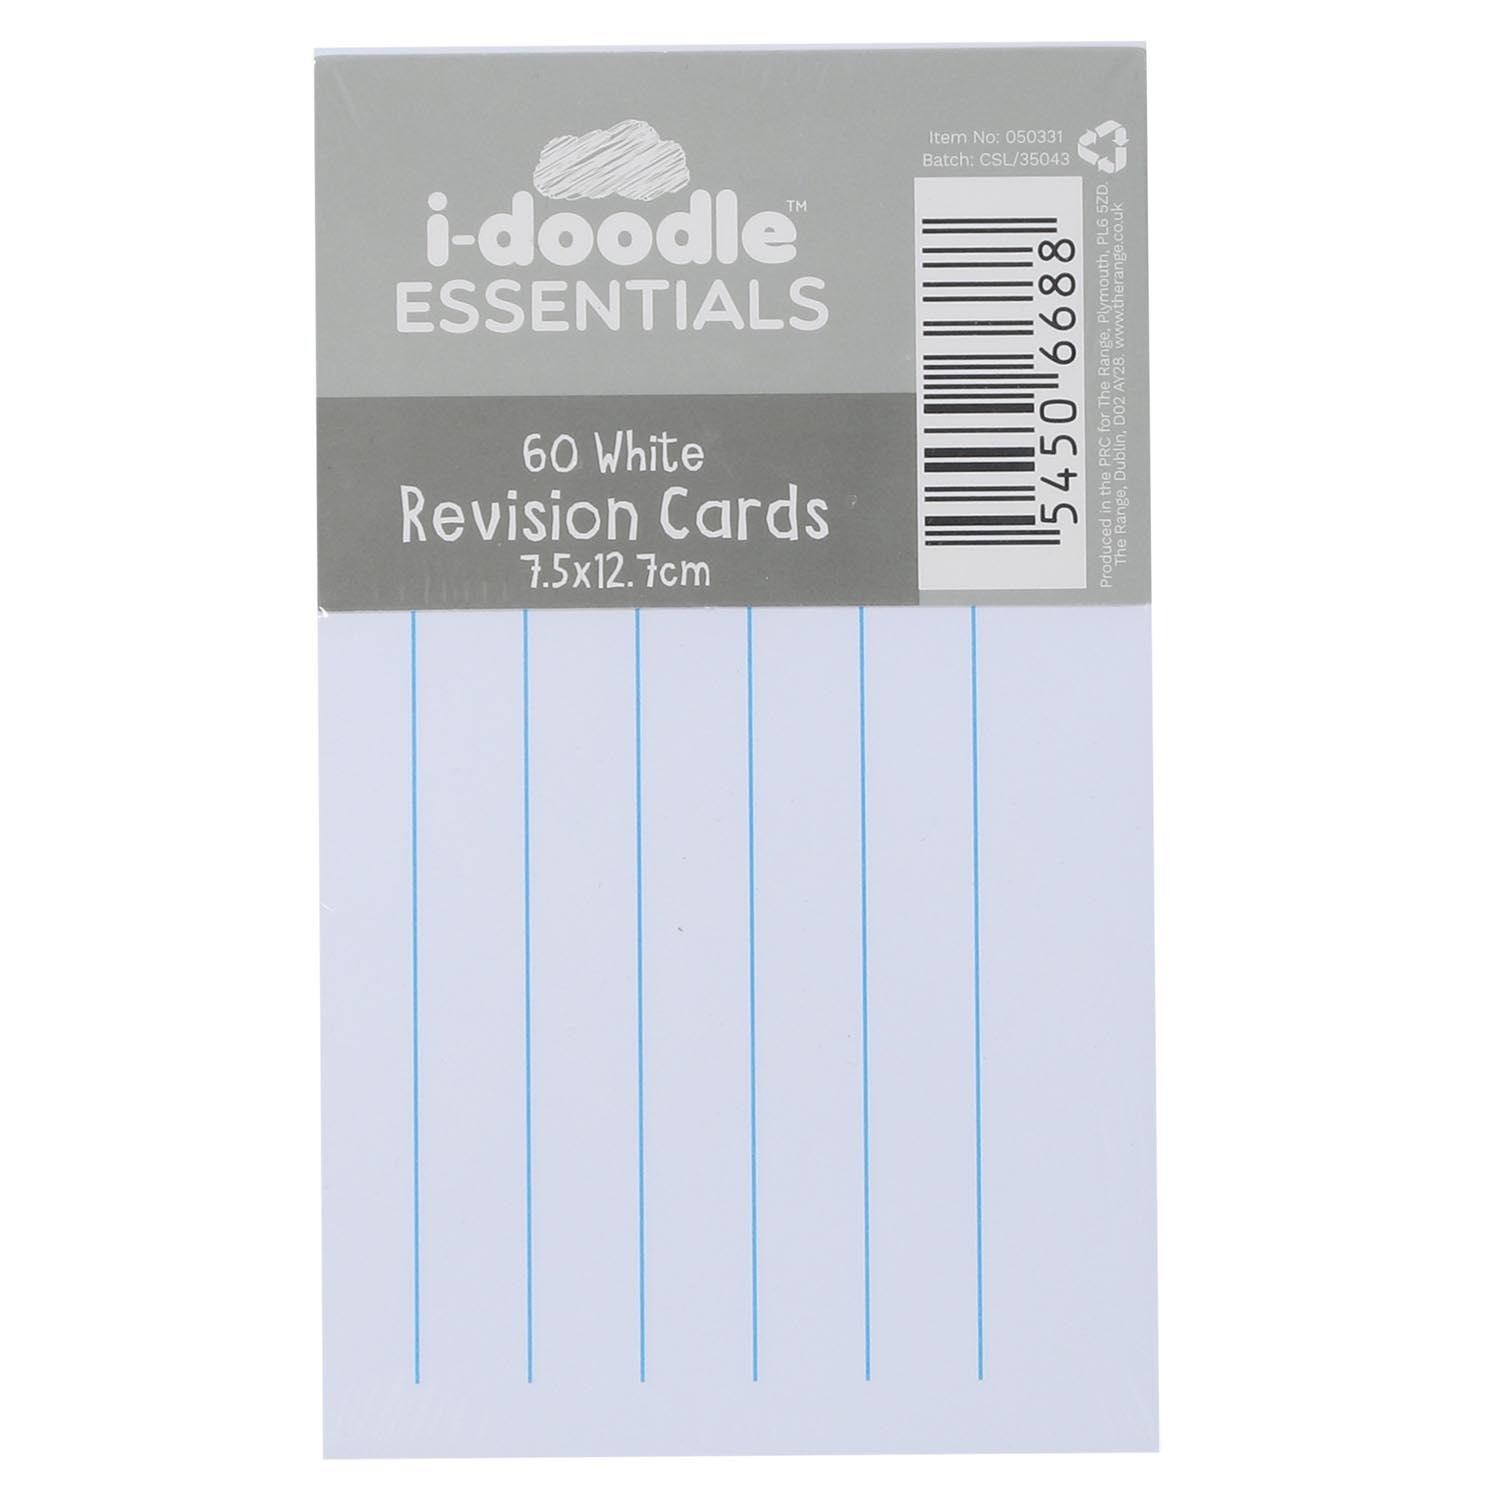 Pack of 60 Revision Cards White Image